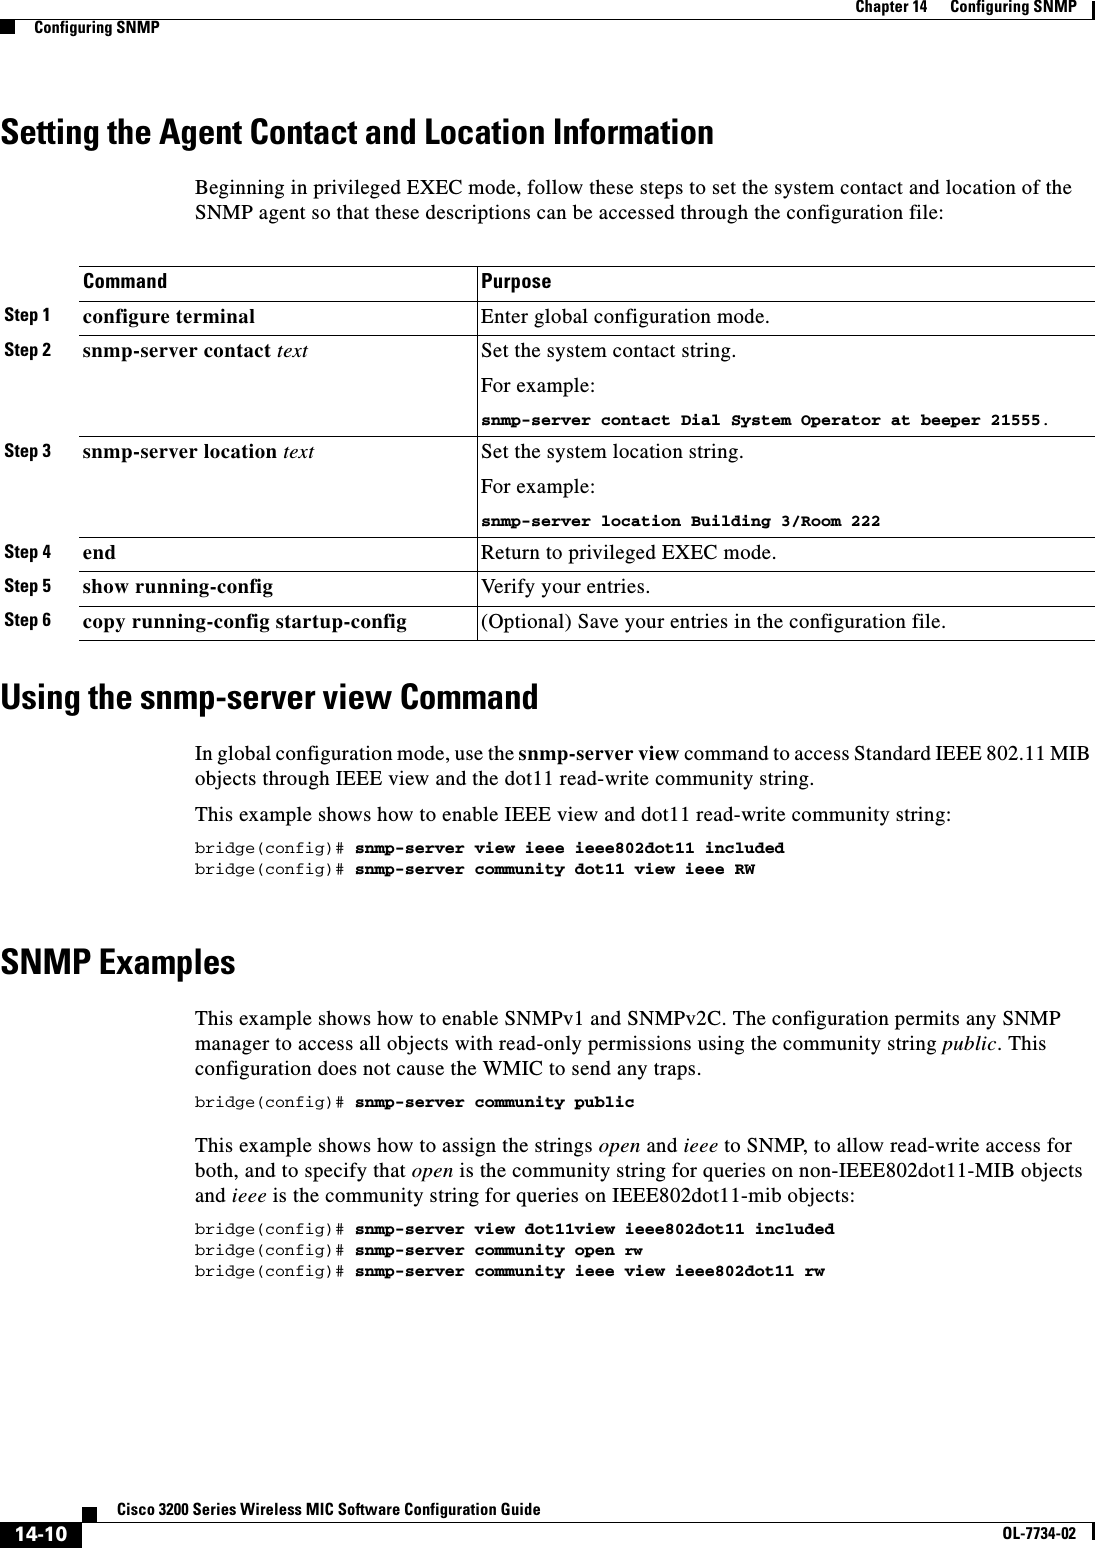 14-10Cisco 3200 Series Wireless MIC Software Configuration GuideOL-7734-02Chapter 14      Configuring SNMPConfiguring SNMPSetting the Agent Contact and Location InformationBeginning in privileged EXEC mode, follow these steps to set the system contact and location of the SNMP agent so that these descriptions can be accessed through the configuration file:Using the snmp-server view CommandIn global configuration mode, use the snmp-server view command to access Standard IEEE 802.11 MIB objects through IEEE view and the dot11 read-write community string. This example shows how to enable IEEE view and dot11 read-write community string:bridge(config)# snmp-server view ieee ieee802dot11 includedbridge(config)# snmp-server community dot11 view ieee RWSNMP ExamplesThis example shows how to enable SNMPv1 and SNMPv2C. The configuration permits any SNMP manager to access all objects with read-only permissions using the community string public. This configuration does not cause the WMIC to send any traps.bridge(config)# snmp-server community publicThis example shows how to assign the strings open and ieee to SNMP, to allow read-write access for both, and to specify that open is the community string for queries on non-IEEE802dot11-MIB objects and ieee is the community string for queries on IEEE802dot11-mib objects:bridge(config)# snmp-server view dot11view ieee802dot11 includedbridge(config)# snmp-server community open rwbridge(config)# snmp-server community ieee view ieee802dot11 rwCommand PurposeStep 1 configure terminal Enter global configuration mode.Step 2 snmp-server contact text Set the system contact string.For example:snmp-server contact Dial System Operator at beeper 21555.Step 3 snmp-server location text Set the system location string.For example:snmp-server location Building 3/Room 222Step 4 end Return to privileged EXEC mode.Step 5 show running-config Verify your entries.Step 6 copy running-config startup-config (Optional) Save your entries in the configuration file.